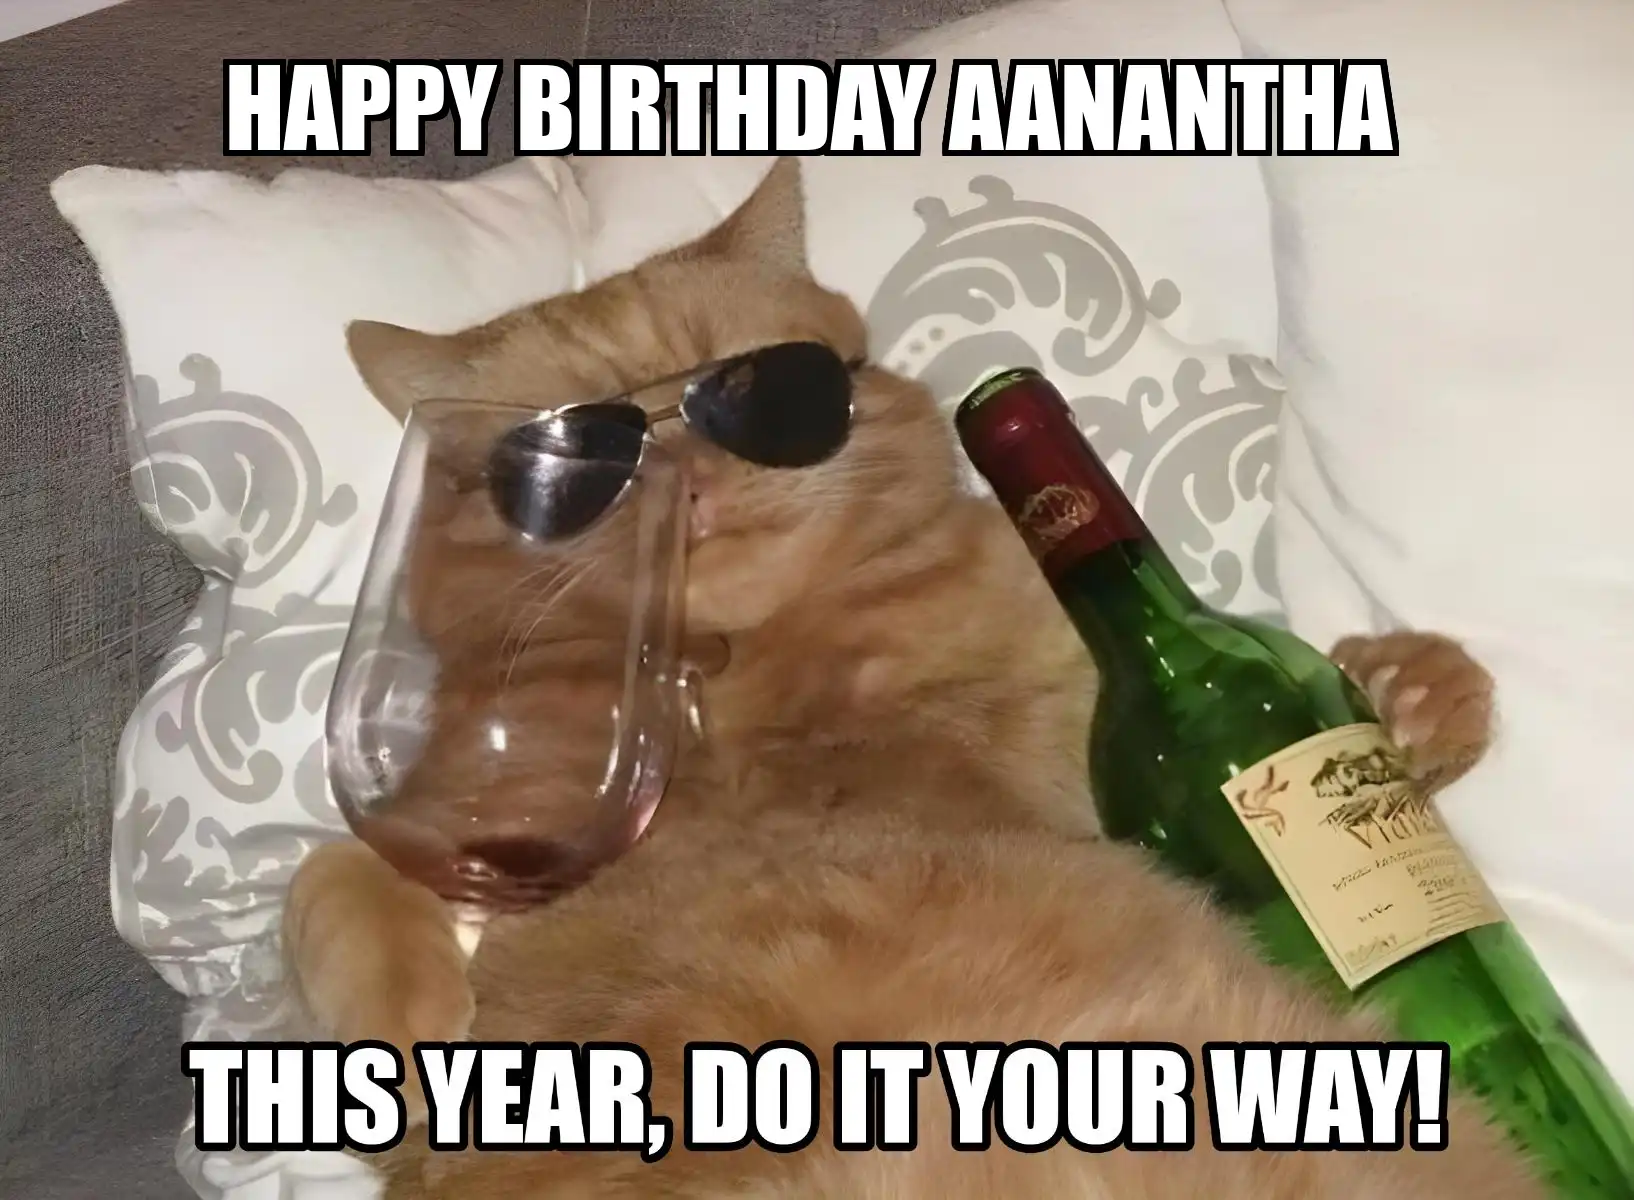 Happy Birthday Aanantha This Year Do It Your Way Meme